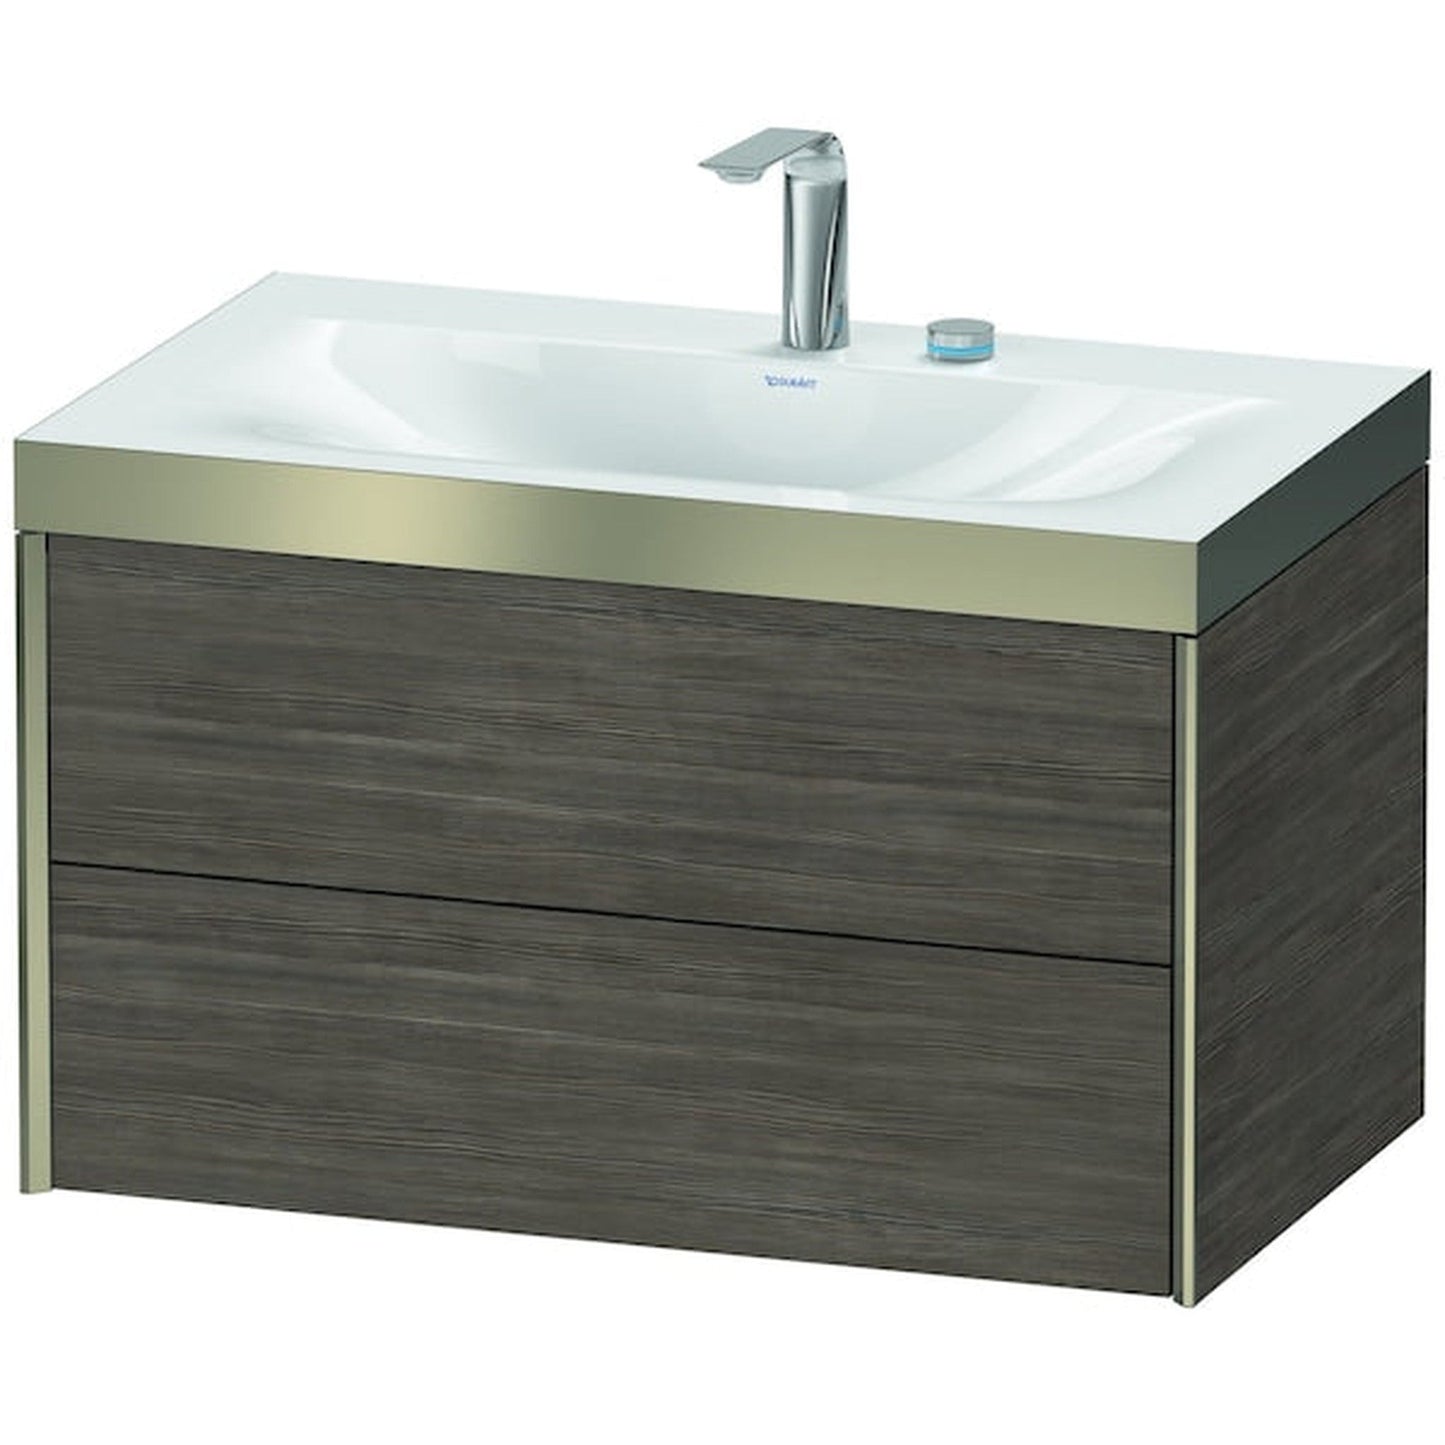 Duravit Xviu 31" x 20" x 19" Two Drawer C-Bonded Wall-Mount Vanity Kit With Two Tap Holes, Pine Terra (XV4615EB151P)